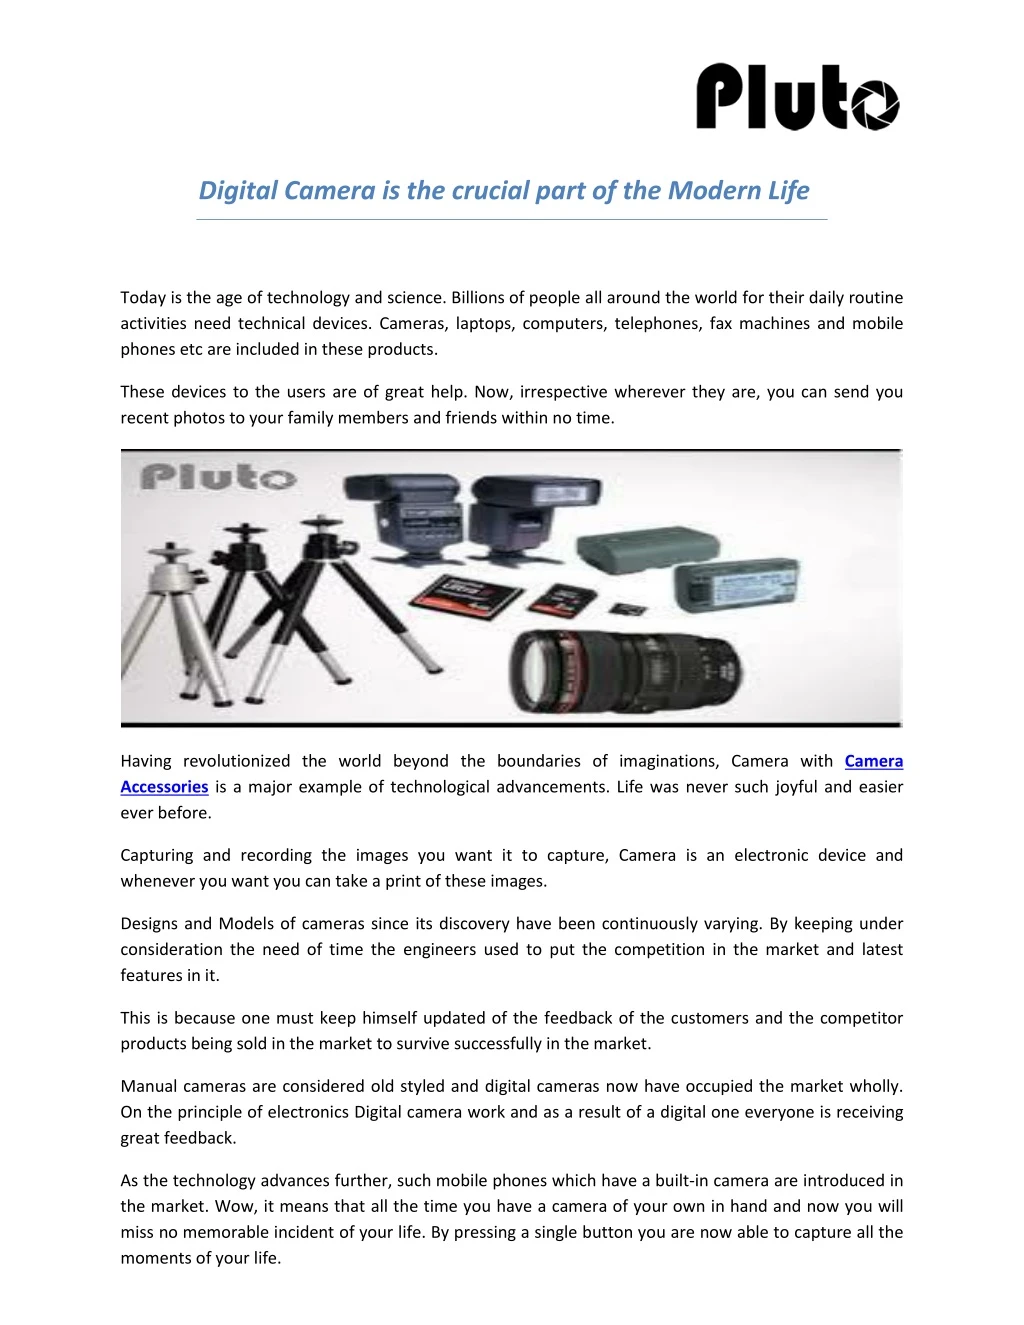 digital camera is the crucial part of the modern